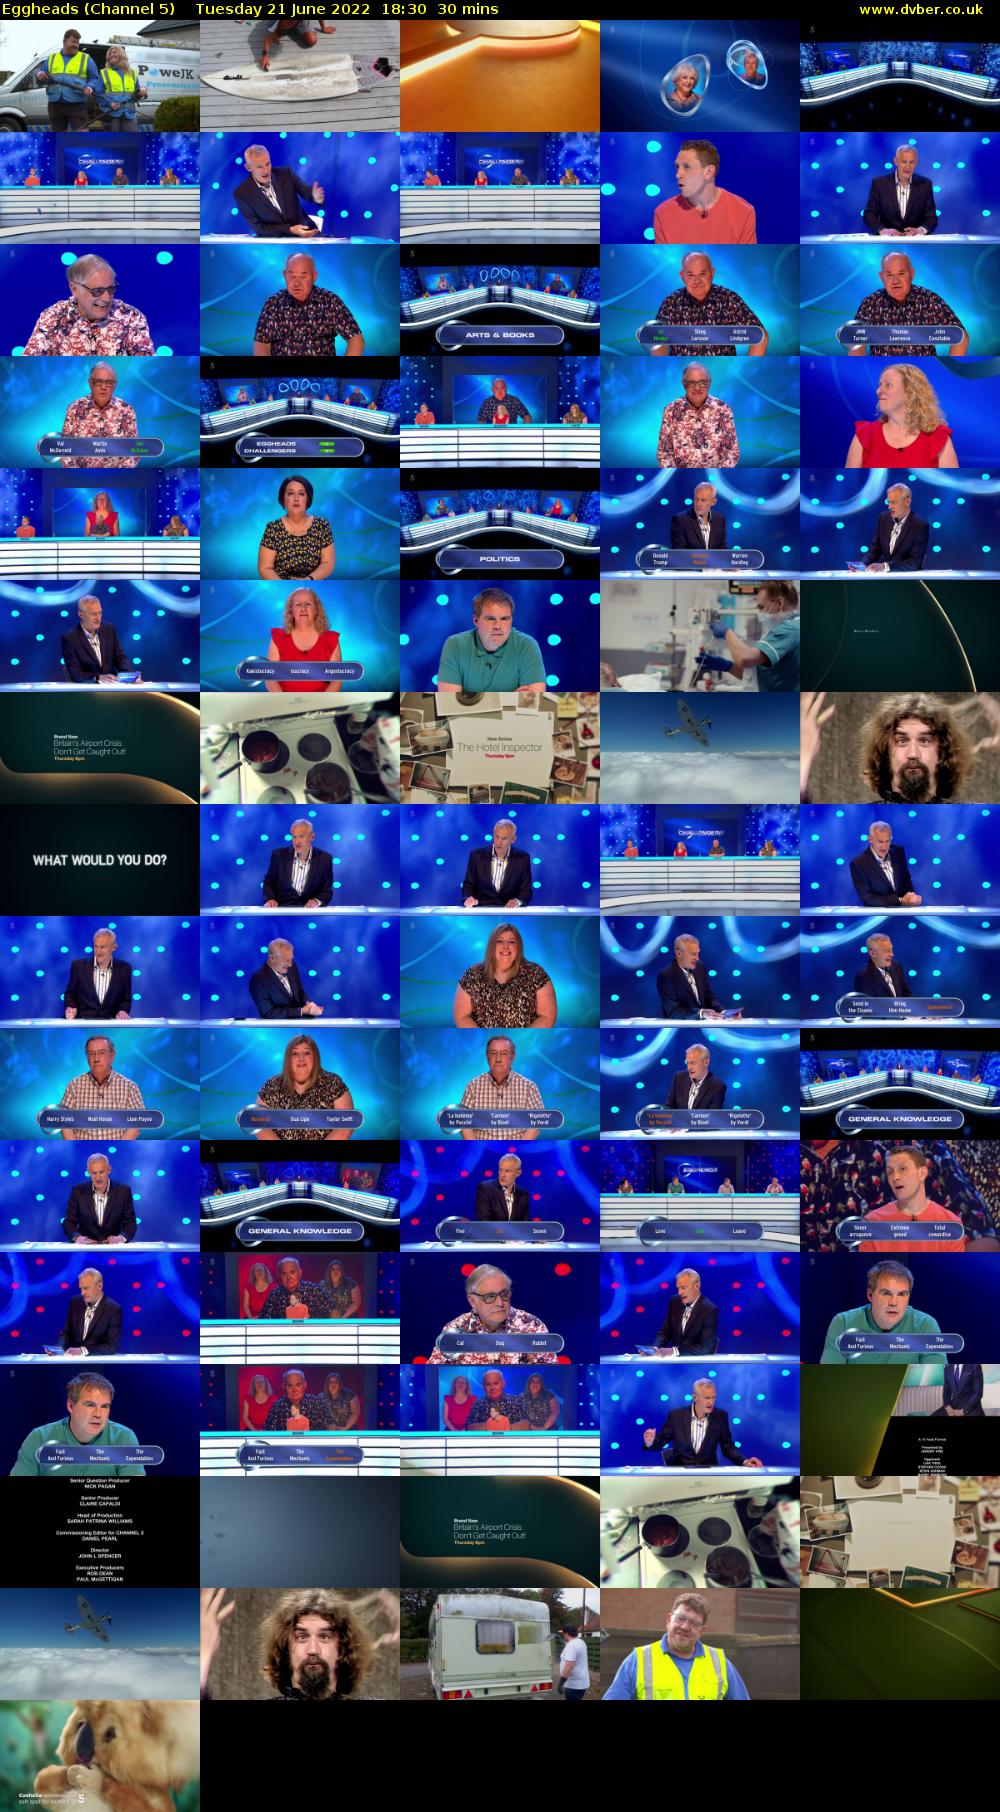 Eggheads (Channel 5) Tuesday 21 June 2022 18:30 - 19:00